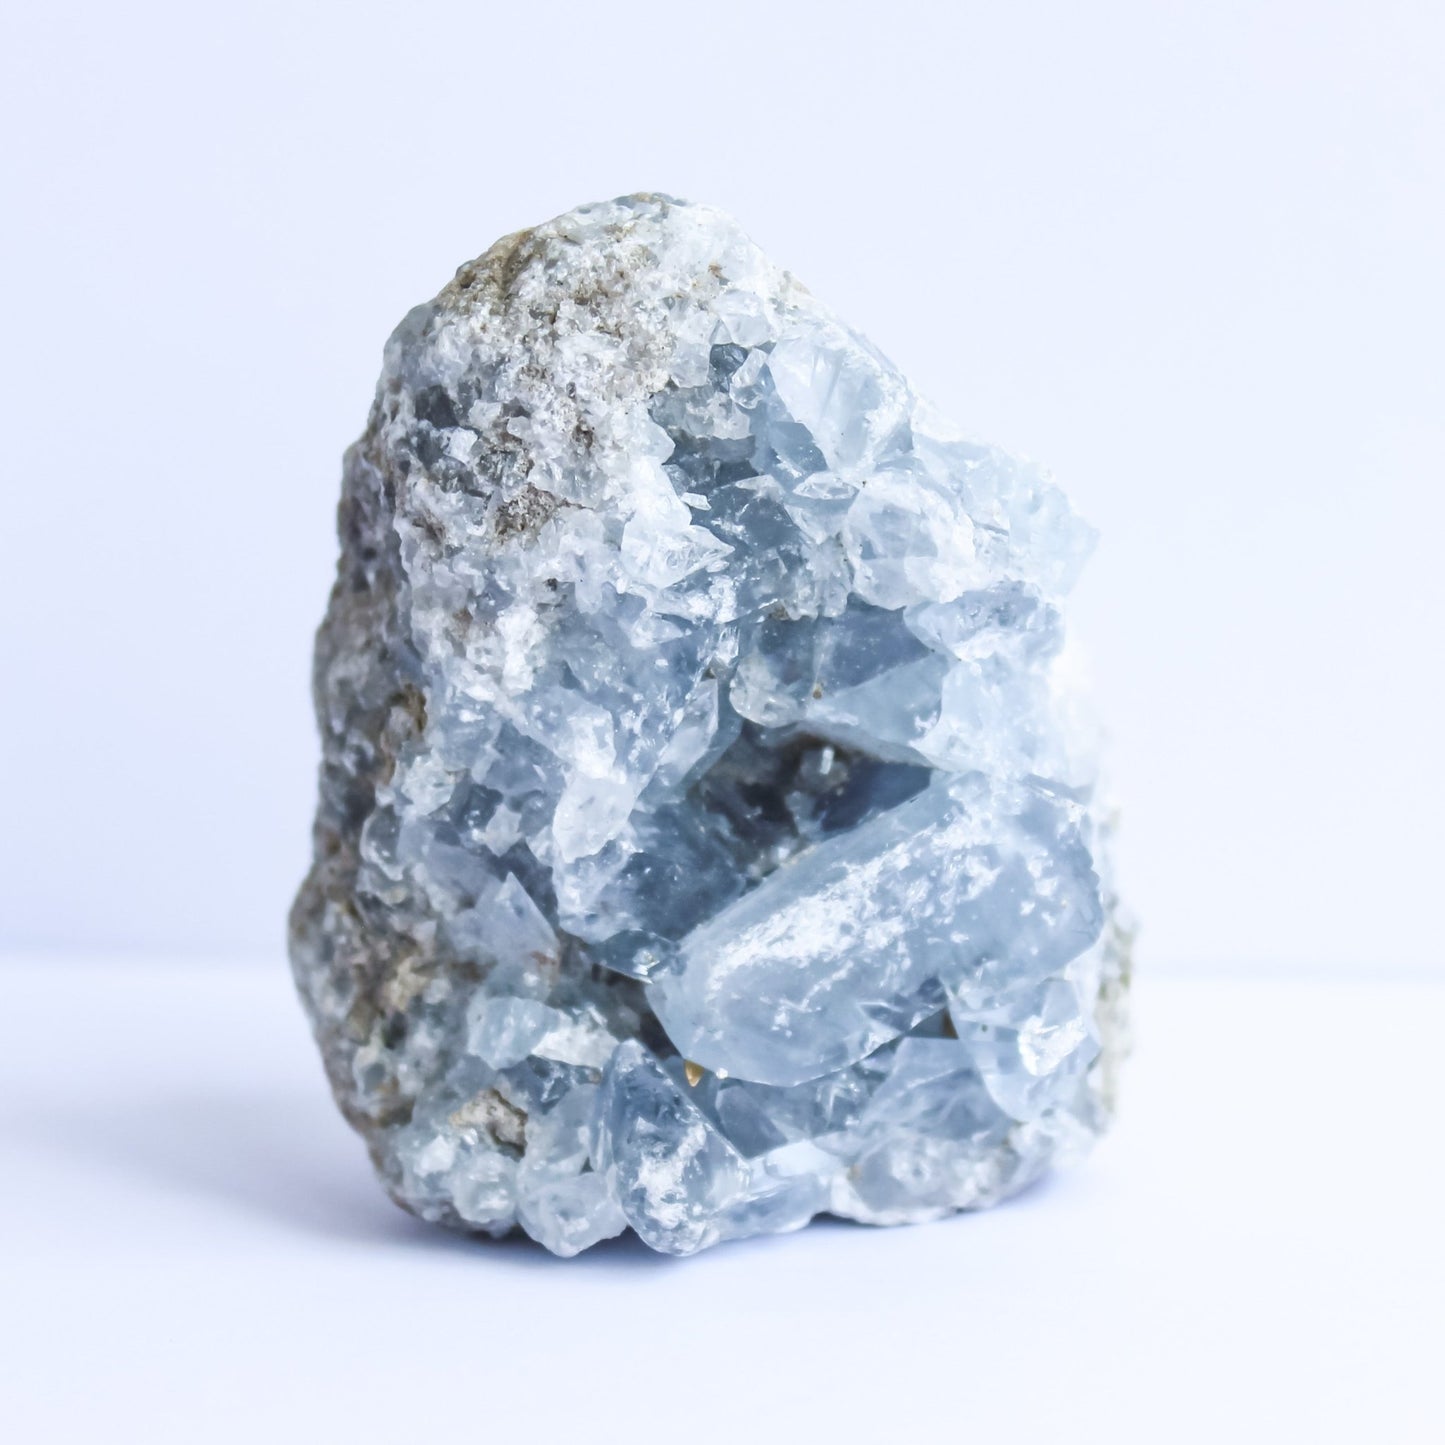 Celestite Geode - Conscious Crystals New Zealand Crystal and Spiritual Shop